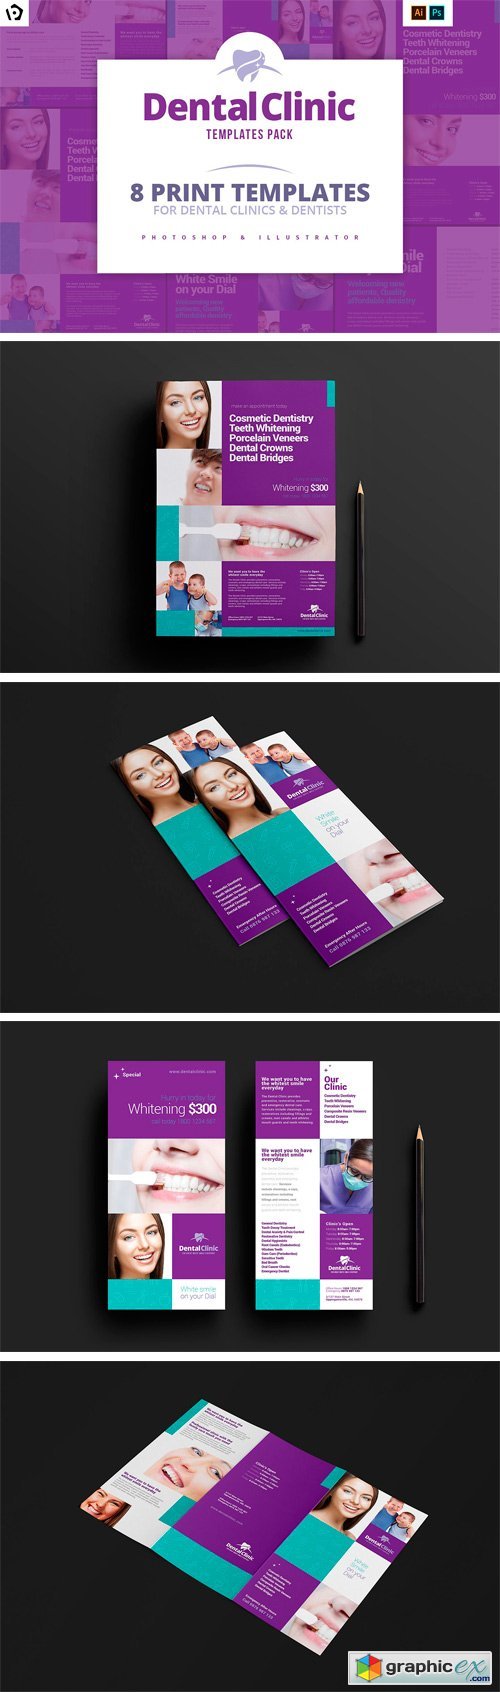 Dental Clinic Templates Pack